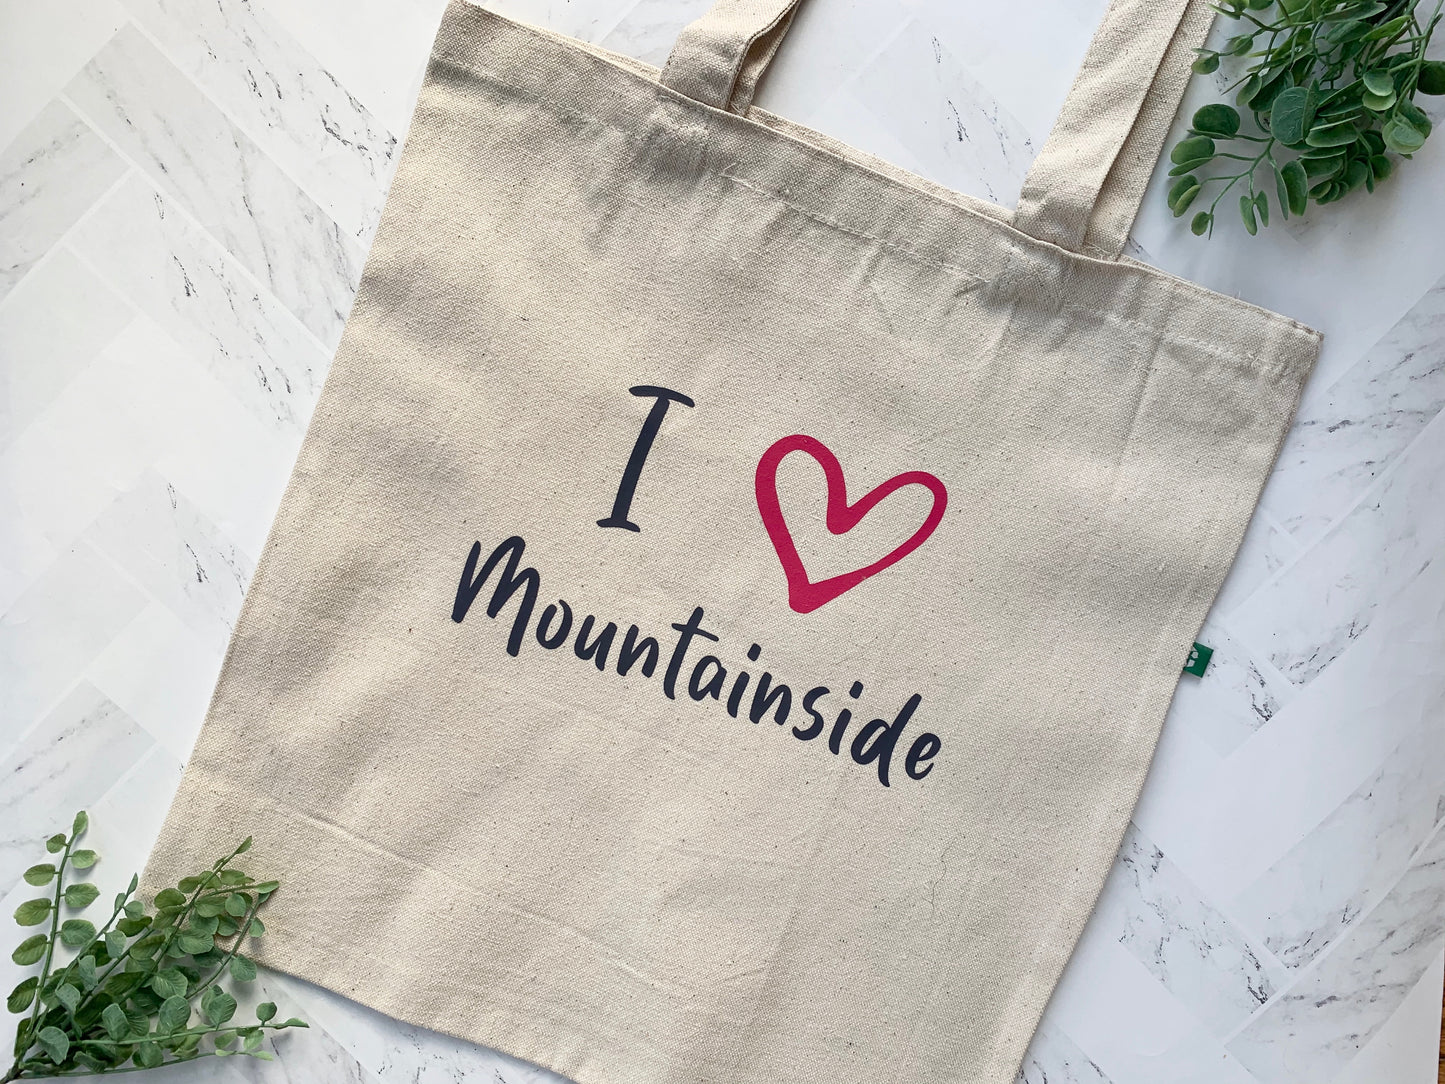 Love My Town Tote